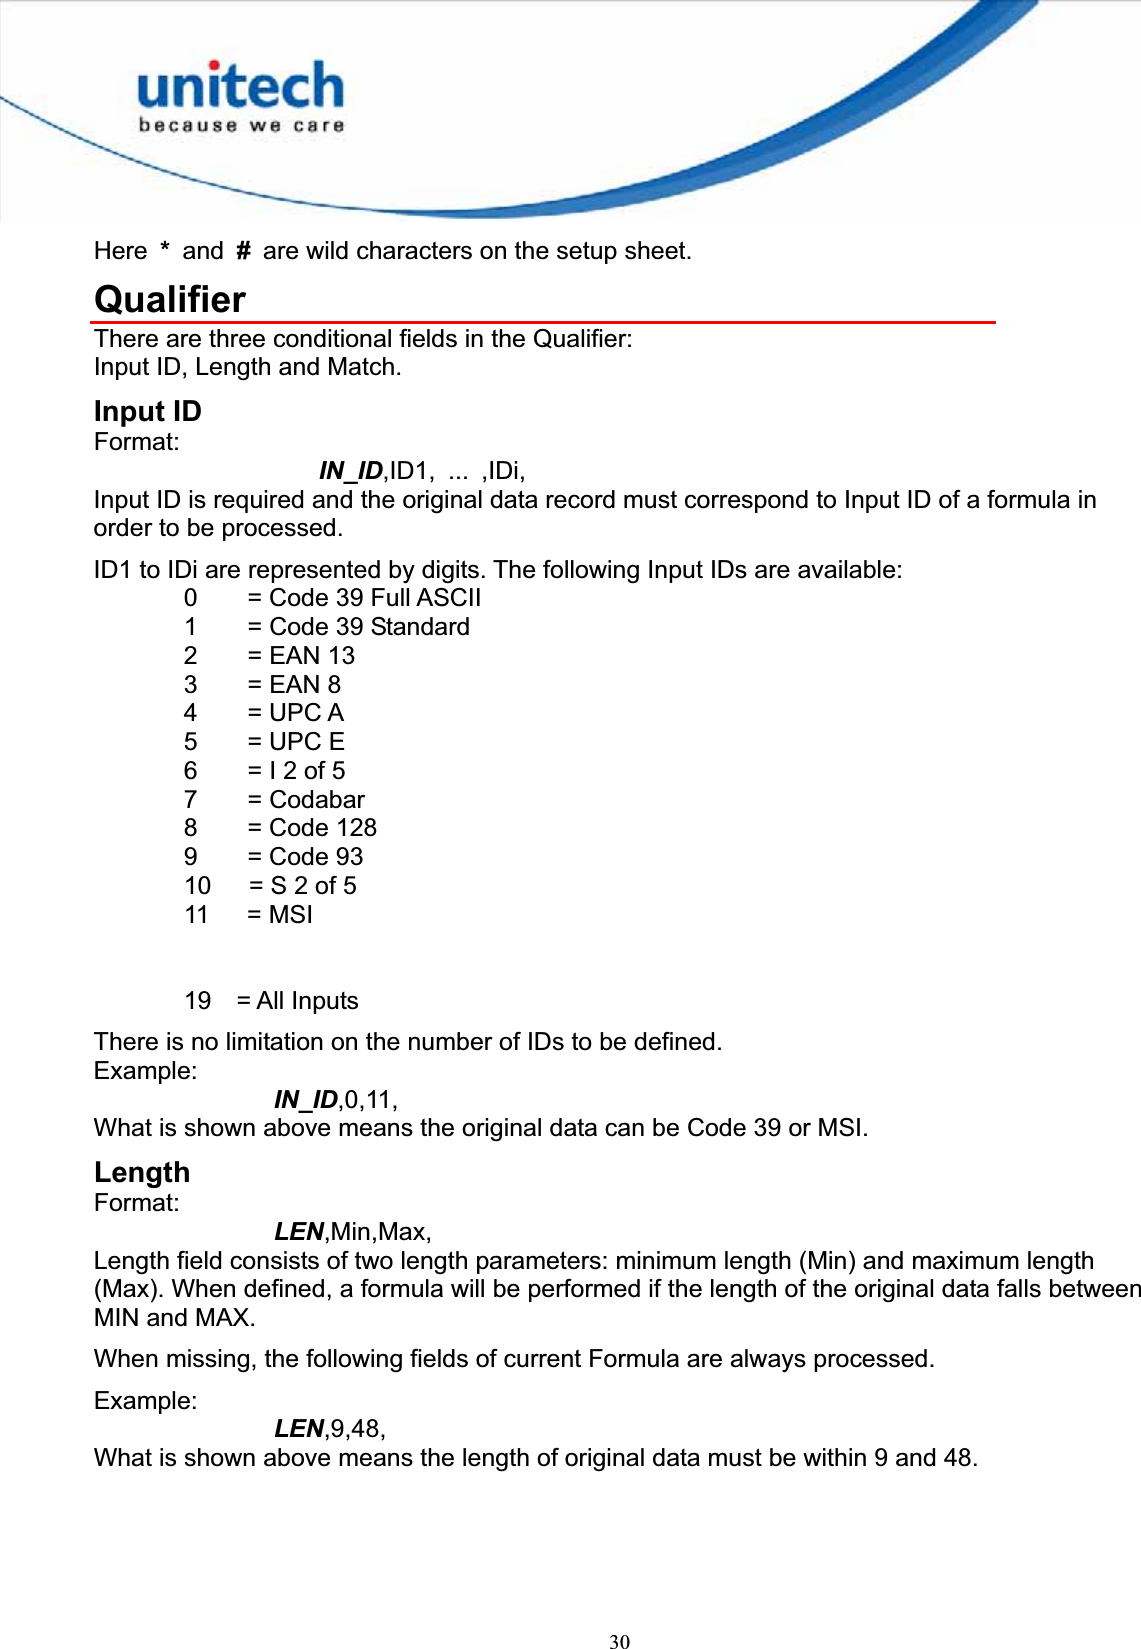 30Here * and #  are wild characters on the setup sheet. QualifierThere are three conditional fields in the Qualifier: Input ID, Length and Match. Input ID Format:IN_ID,ID1, ... ,IDi, Input ID is required and the original data record must correspond to Input ID of a formula in order to be processed. ID1 to IDi are represented by digits. The following Input IDs are available: 0    = Code 39 Full ASCII 1    = Code 39 Standard 2    = EAN 13 3    = EAN 8 4    = UPC A 5    = UPC E 6    = I 2 of 5 7    = Codabar 8    = Code 128 9    = Code 93 10      = S 2 of 5 11   = MSI 19  = All Inputs There is no limitation on the number of IDs to be defined. Example:IN_ID,0,11, What is shown above means the original data can be Code 39 or MSI. Length Format:LEN,Min,Max,Length field consists of two length parameters: minimum length (Min) and maximum length (Max). When defined, a formula will be performed if the length of the original data falls between MIN and MAX. When missing, the following fields of current Formula are always processed. Example:LEN,9,48,What is shown above means the length of original data must be within 9 and 48. 